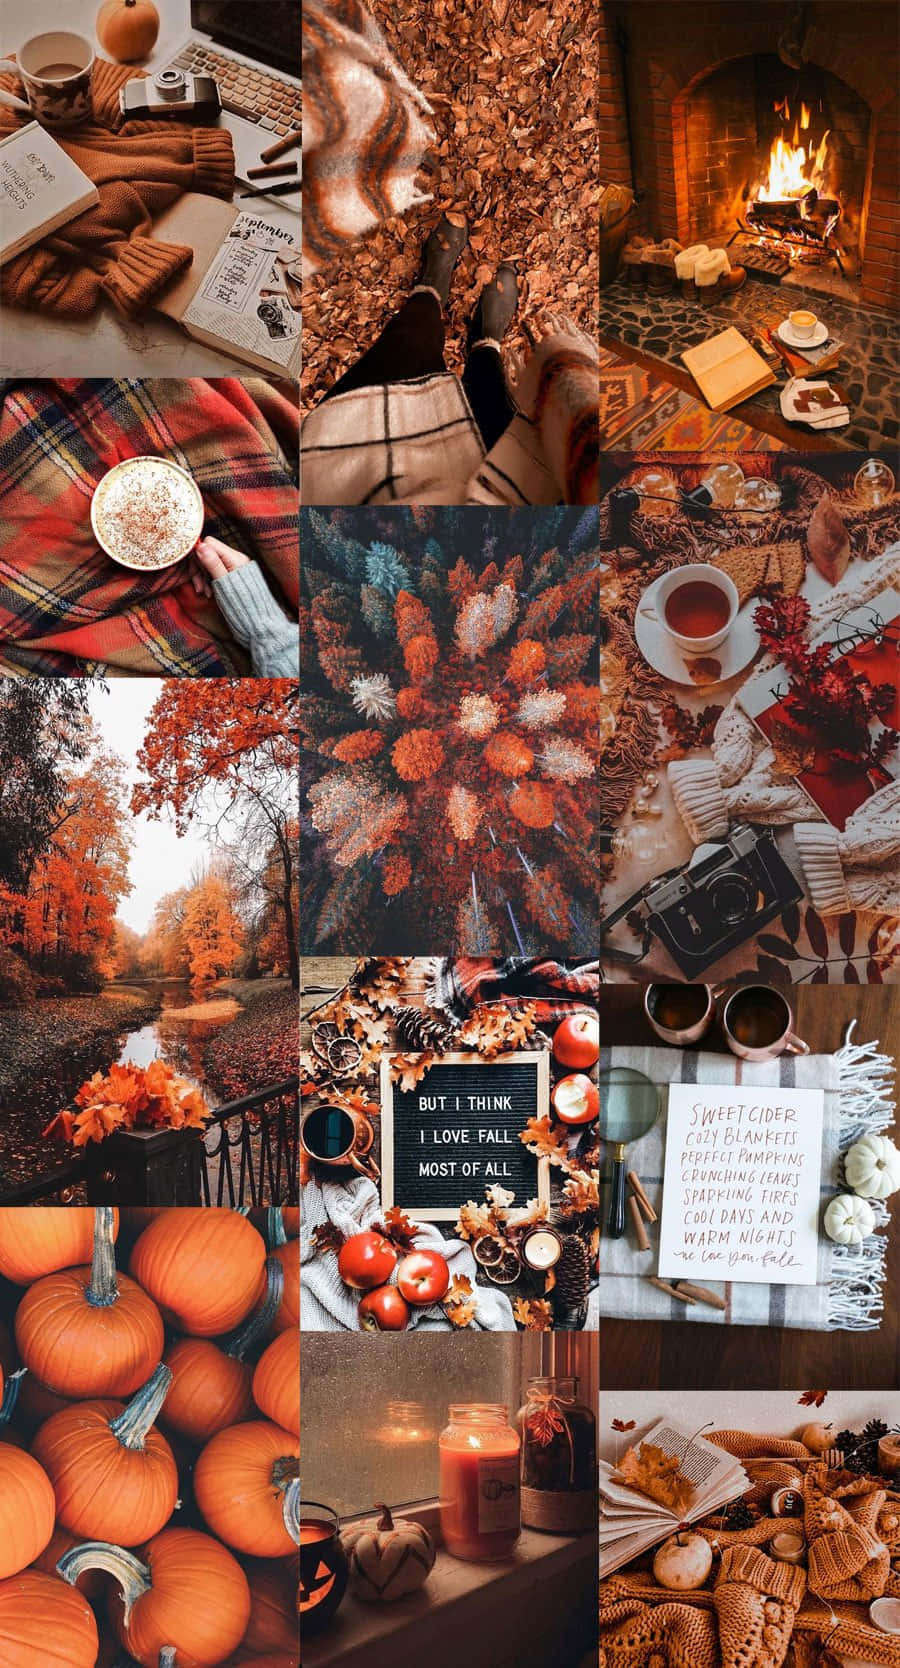 Celebrate The Beauty Of The Season With A Cute Autumn Day. Wallpaper